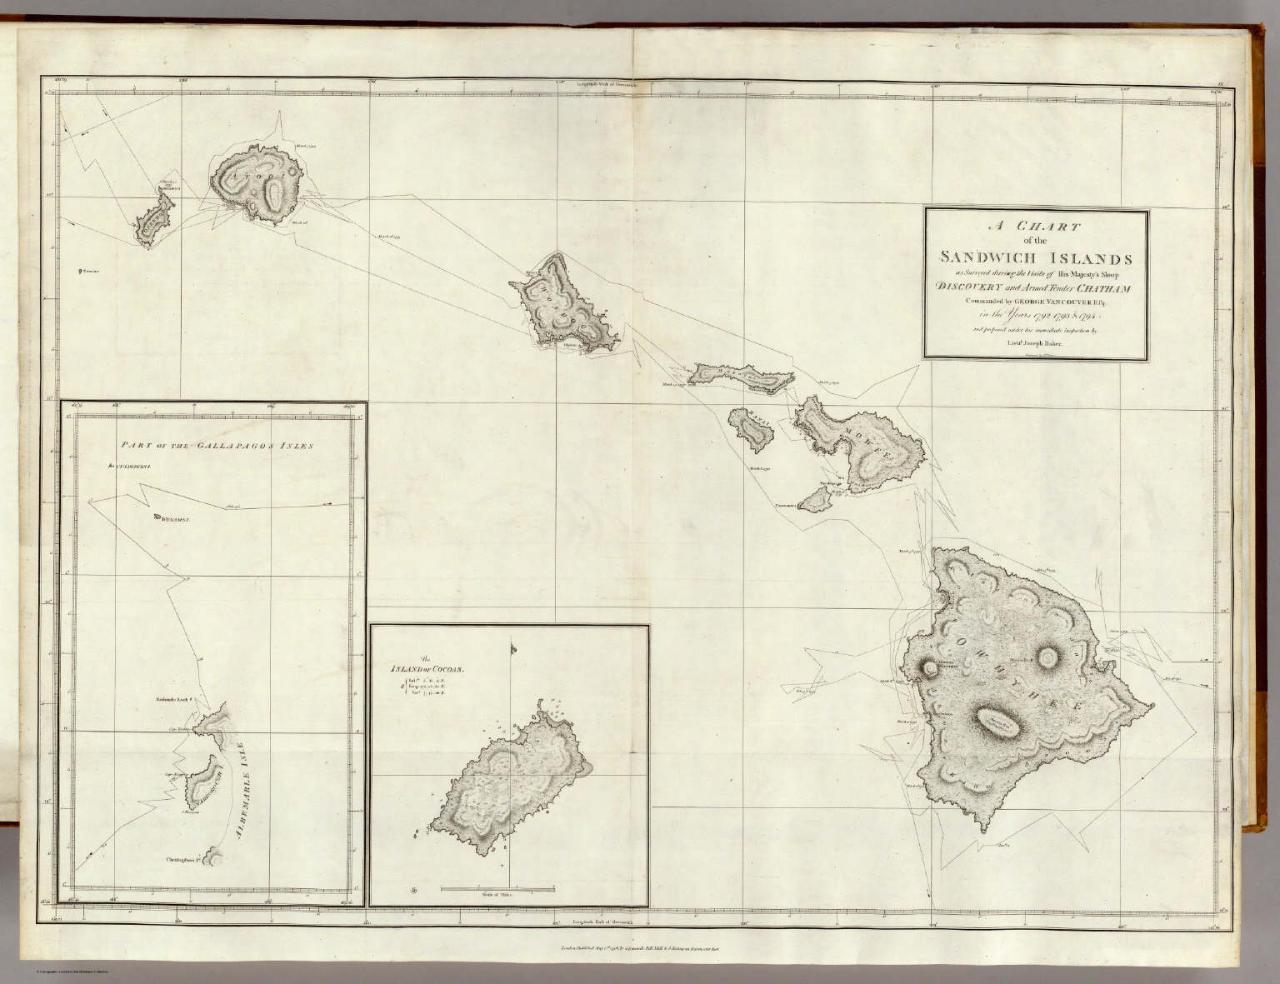 1798 Chart of the Sandwich Islands (Vancouver)